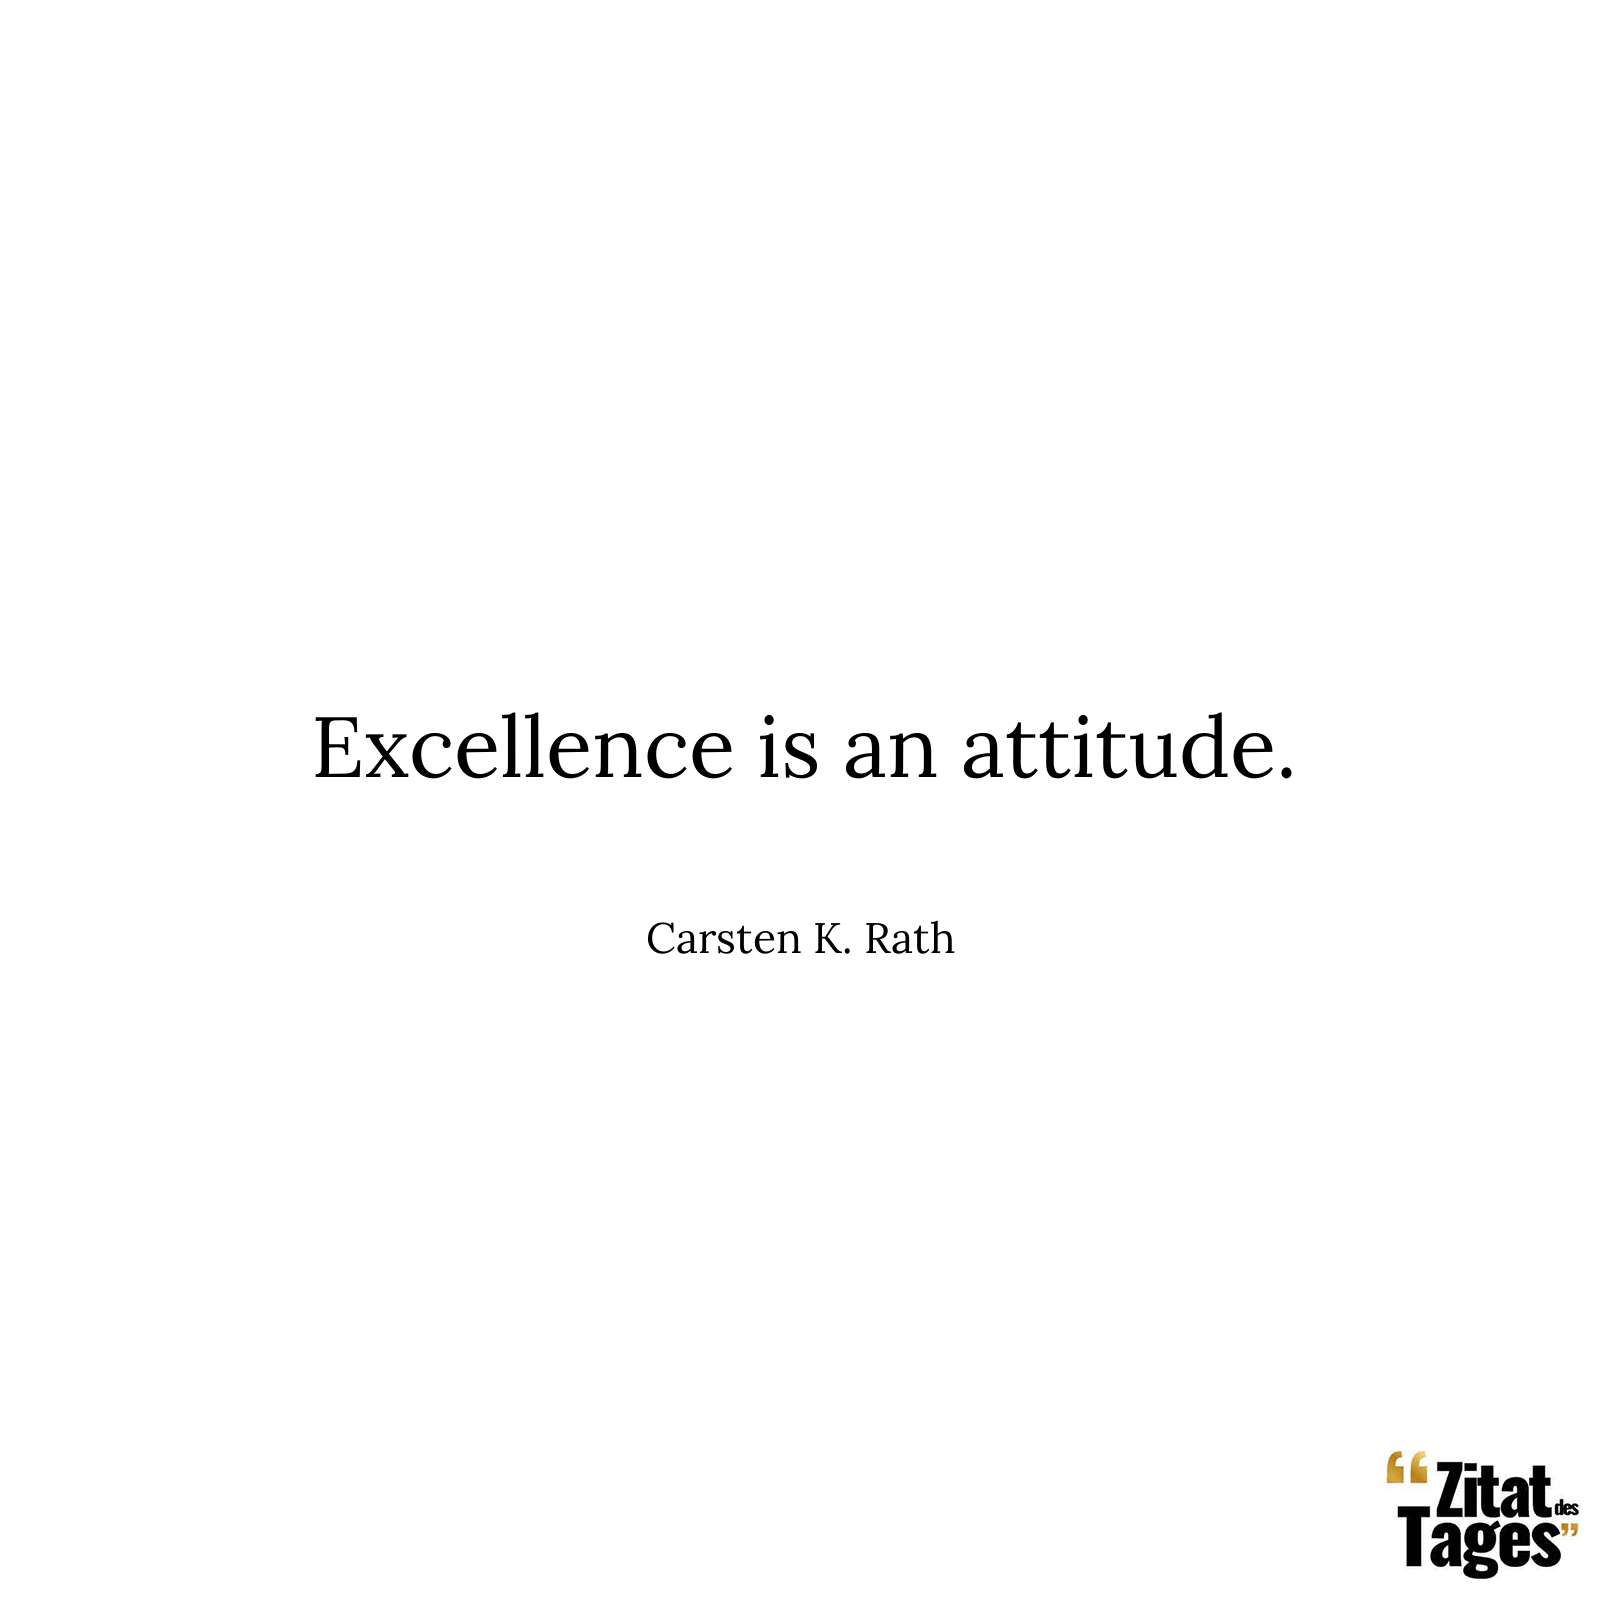 Excellence is an attitude. - Carsten K. Rath